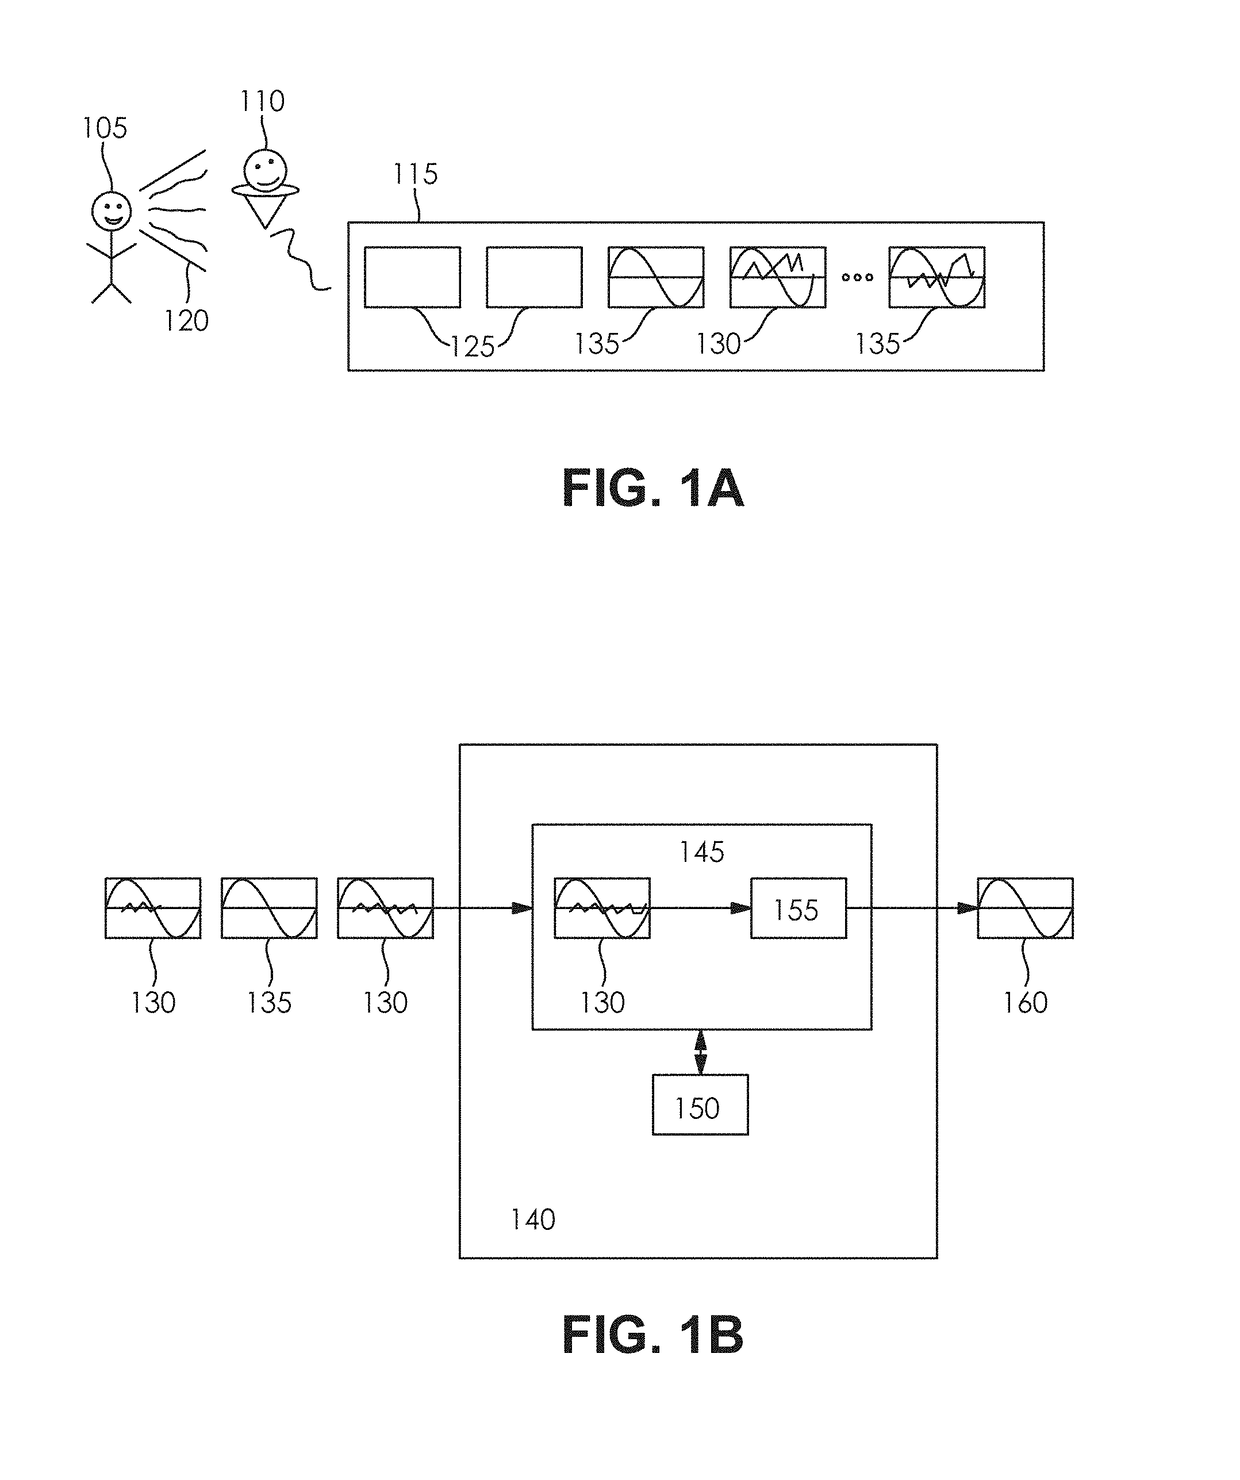 System and method for automatically removing noise defects from sound recordings